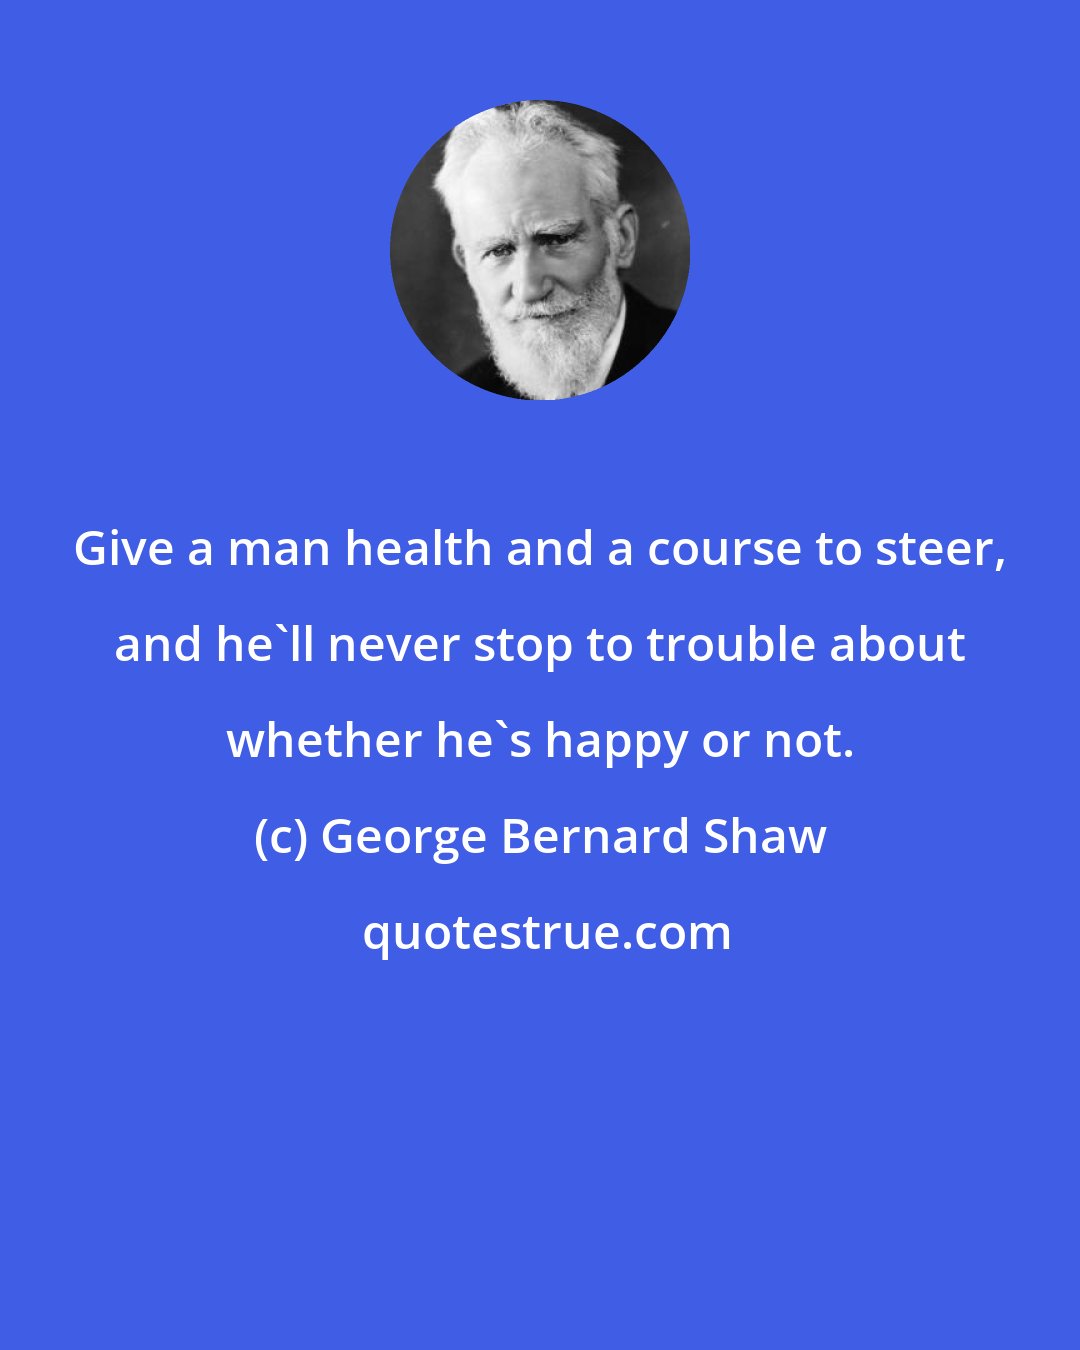 George Bernard Shaw: Give a man health and a course to steer, and he'll never stop to trouble about whether he's happy or not.